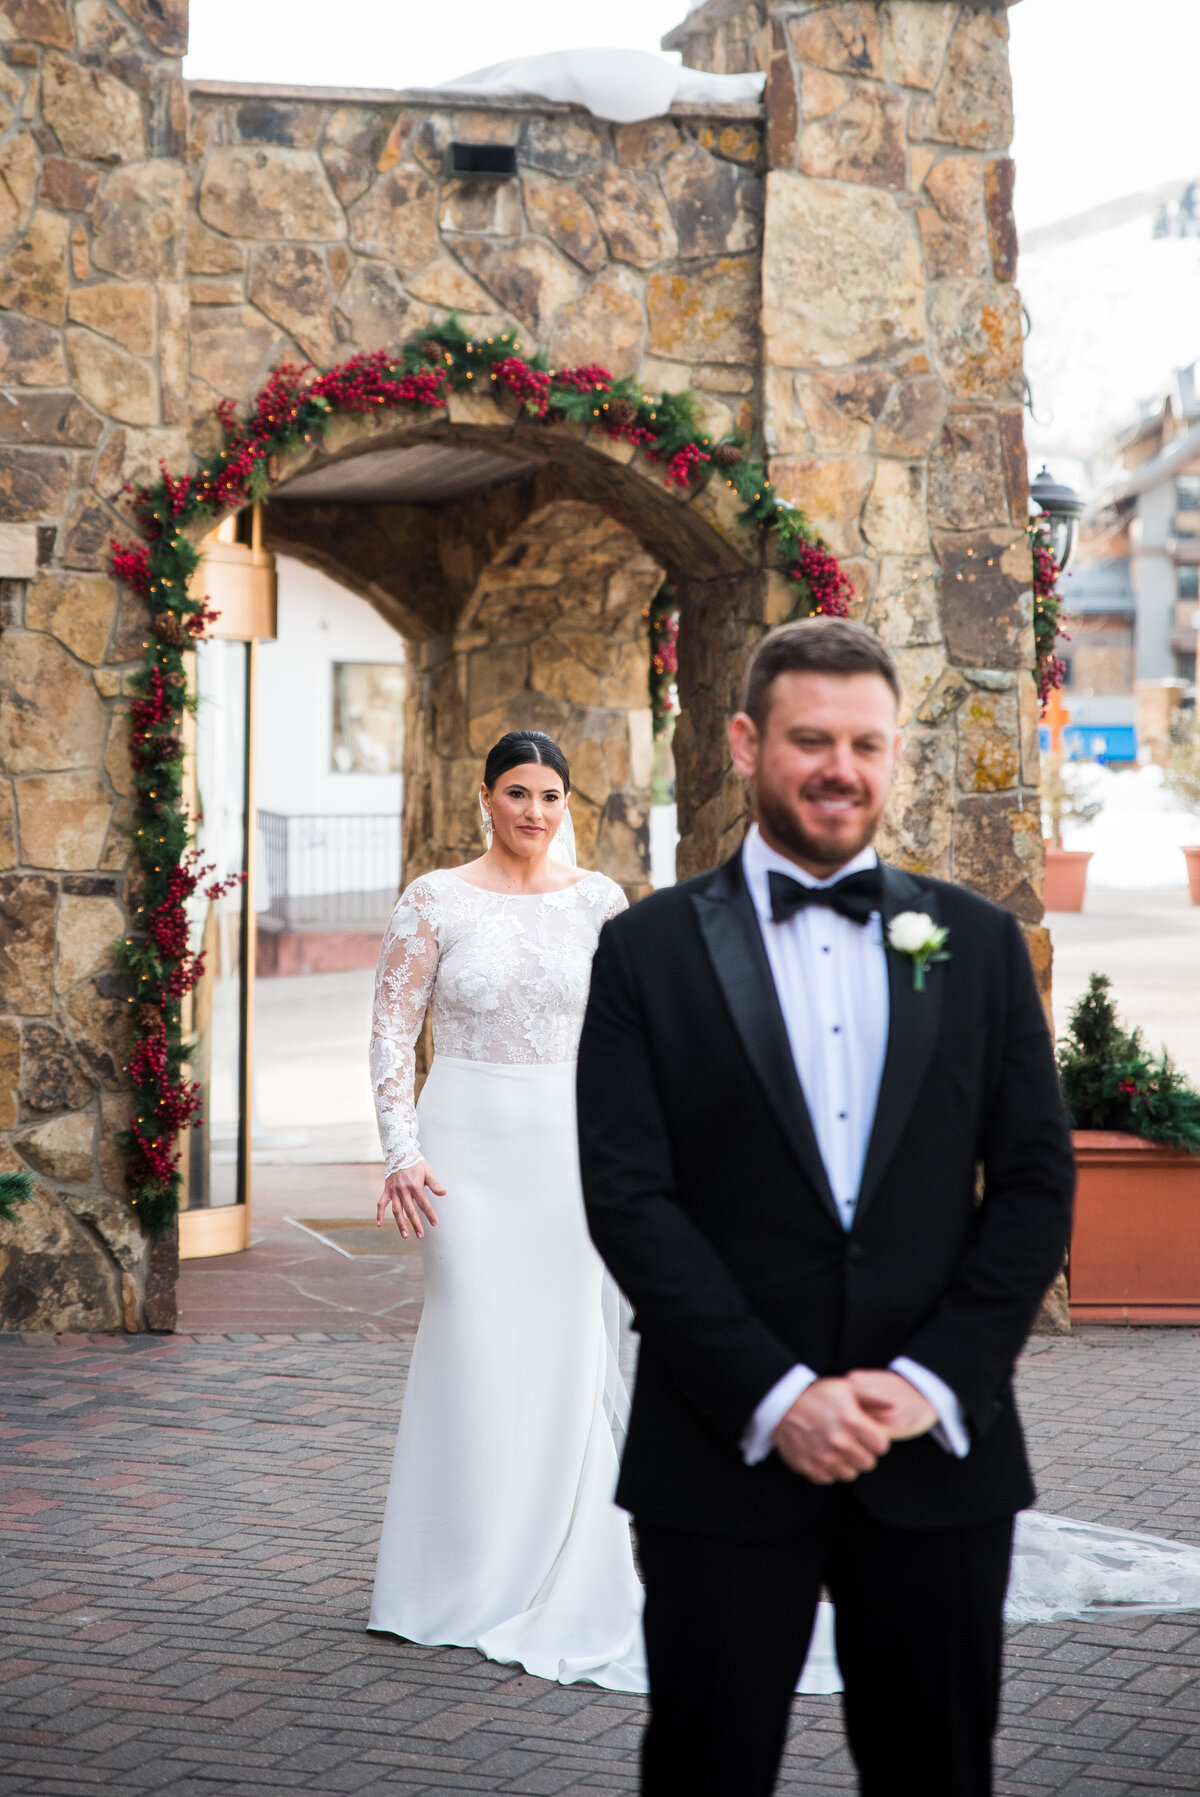 A groom waits in the foreground as his bride approaches for their first look in Vail, Colorado.